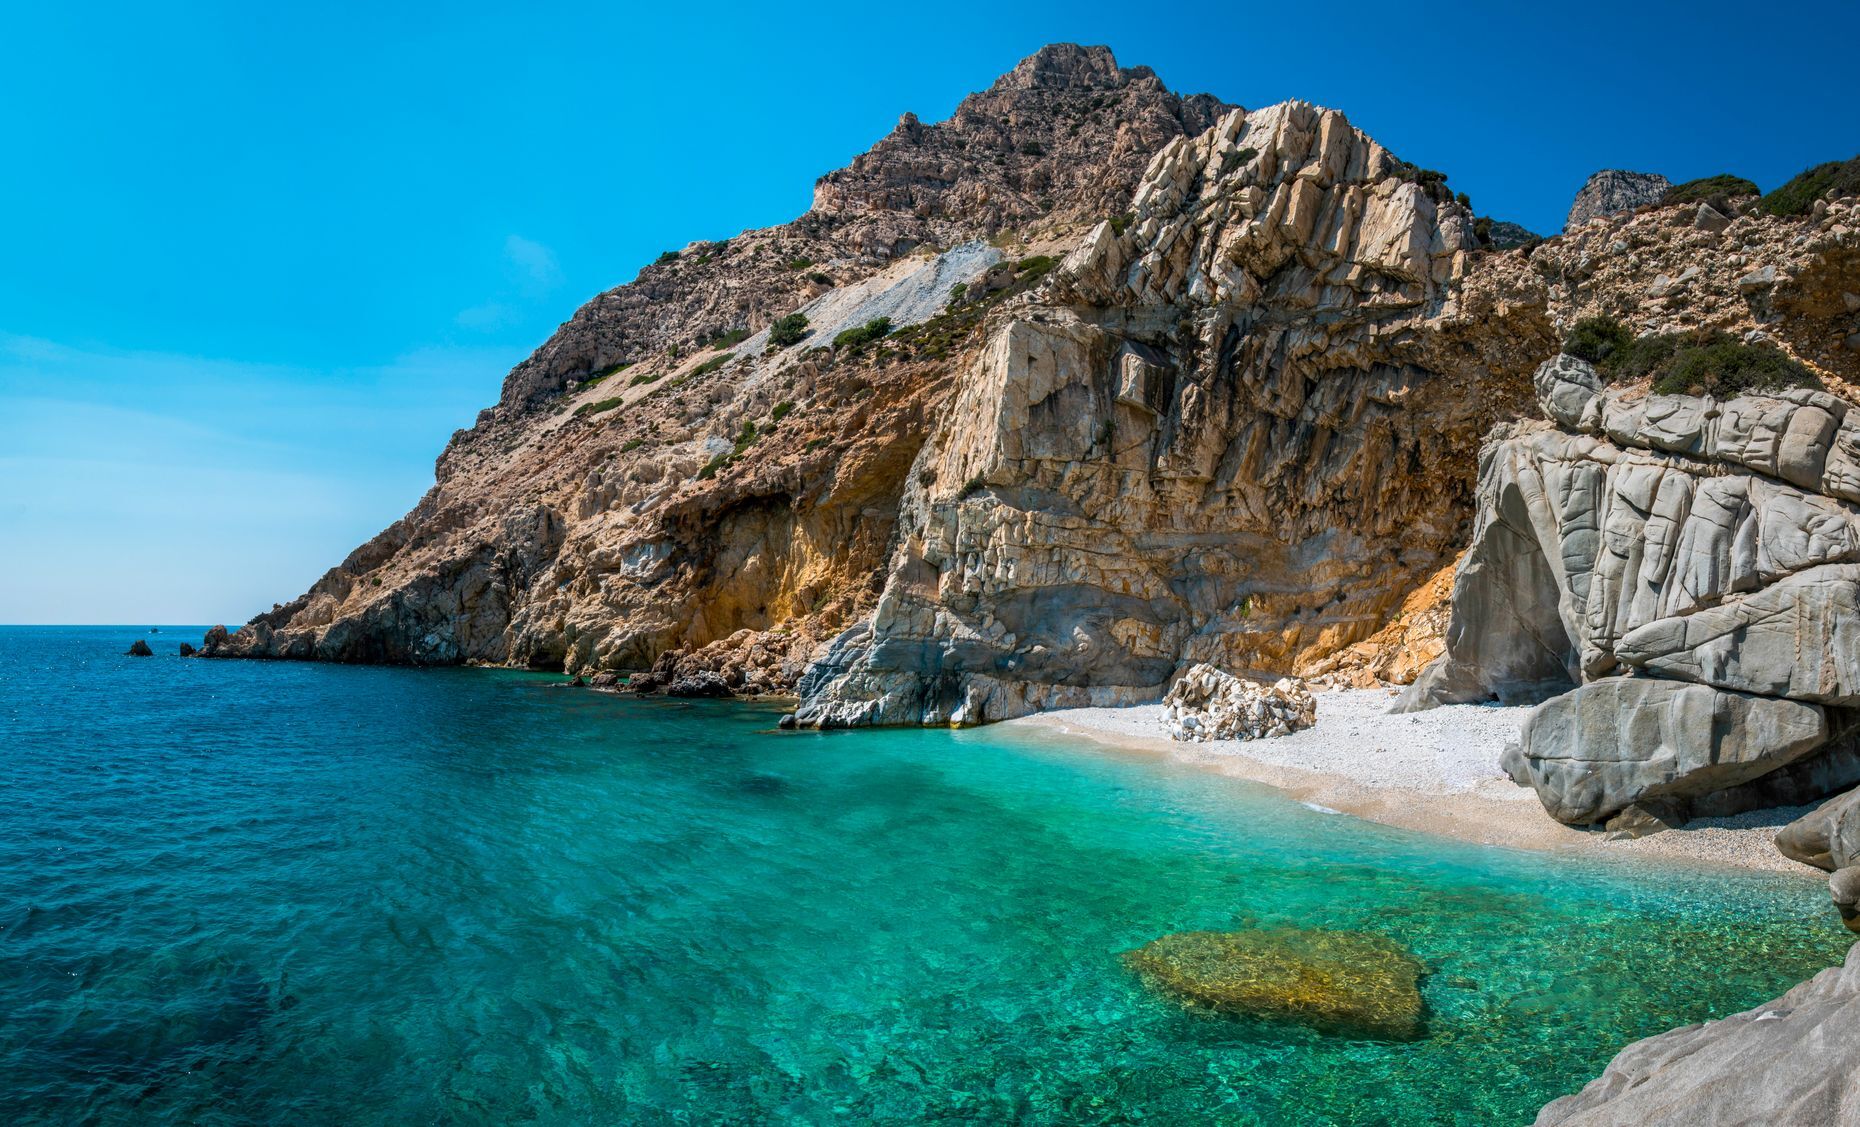 <a href="https://www.discovergreece.com/north-aegean-islands/ikaria" rel="noreferrer noopener">Ikaria</a> is a peaceful island in the North Aegean, perfect for a tranquil escape within the heart of Greece. Indeed, <a href="https://www.greeka.com/eastern-aegean/ikaria/beaches/nas/" rel="noreferrer noopener">Nas</a>, <a href="https://www.visitikaria.gr/en/discover/beaches/seychelles" rel="noreferrer noopener">Seychelles</a>, and other spectacular beaches are true havens of peace and unspoiled nature. Renowned for the <a href="https://www.businessinsider.com/ikaria-greece-blue-zone-and-its-longevity-secrets-2023-9" rel="noreferrer noopener">longevity of its inhabitants</a>, Ikaria also offers delicious, healthy local cuisine and thermal springs where visitors can relax and unwind.